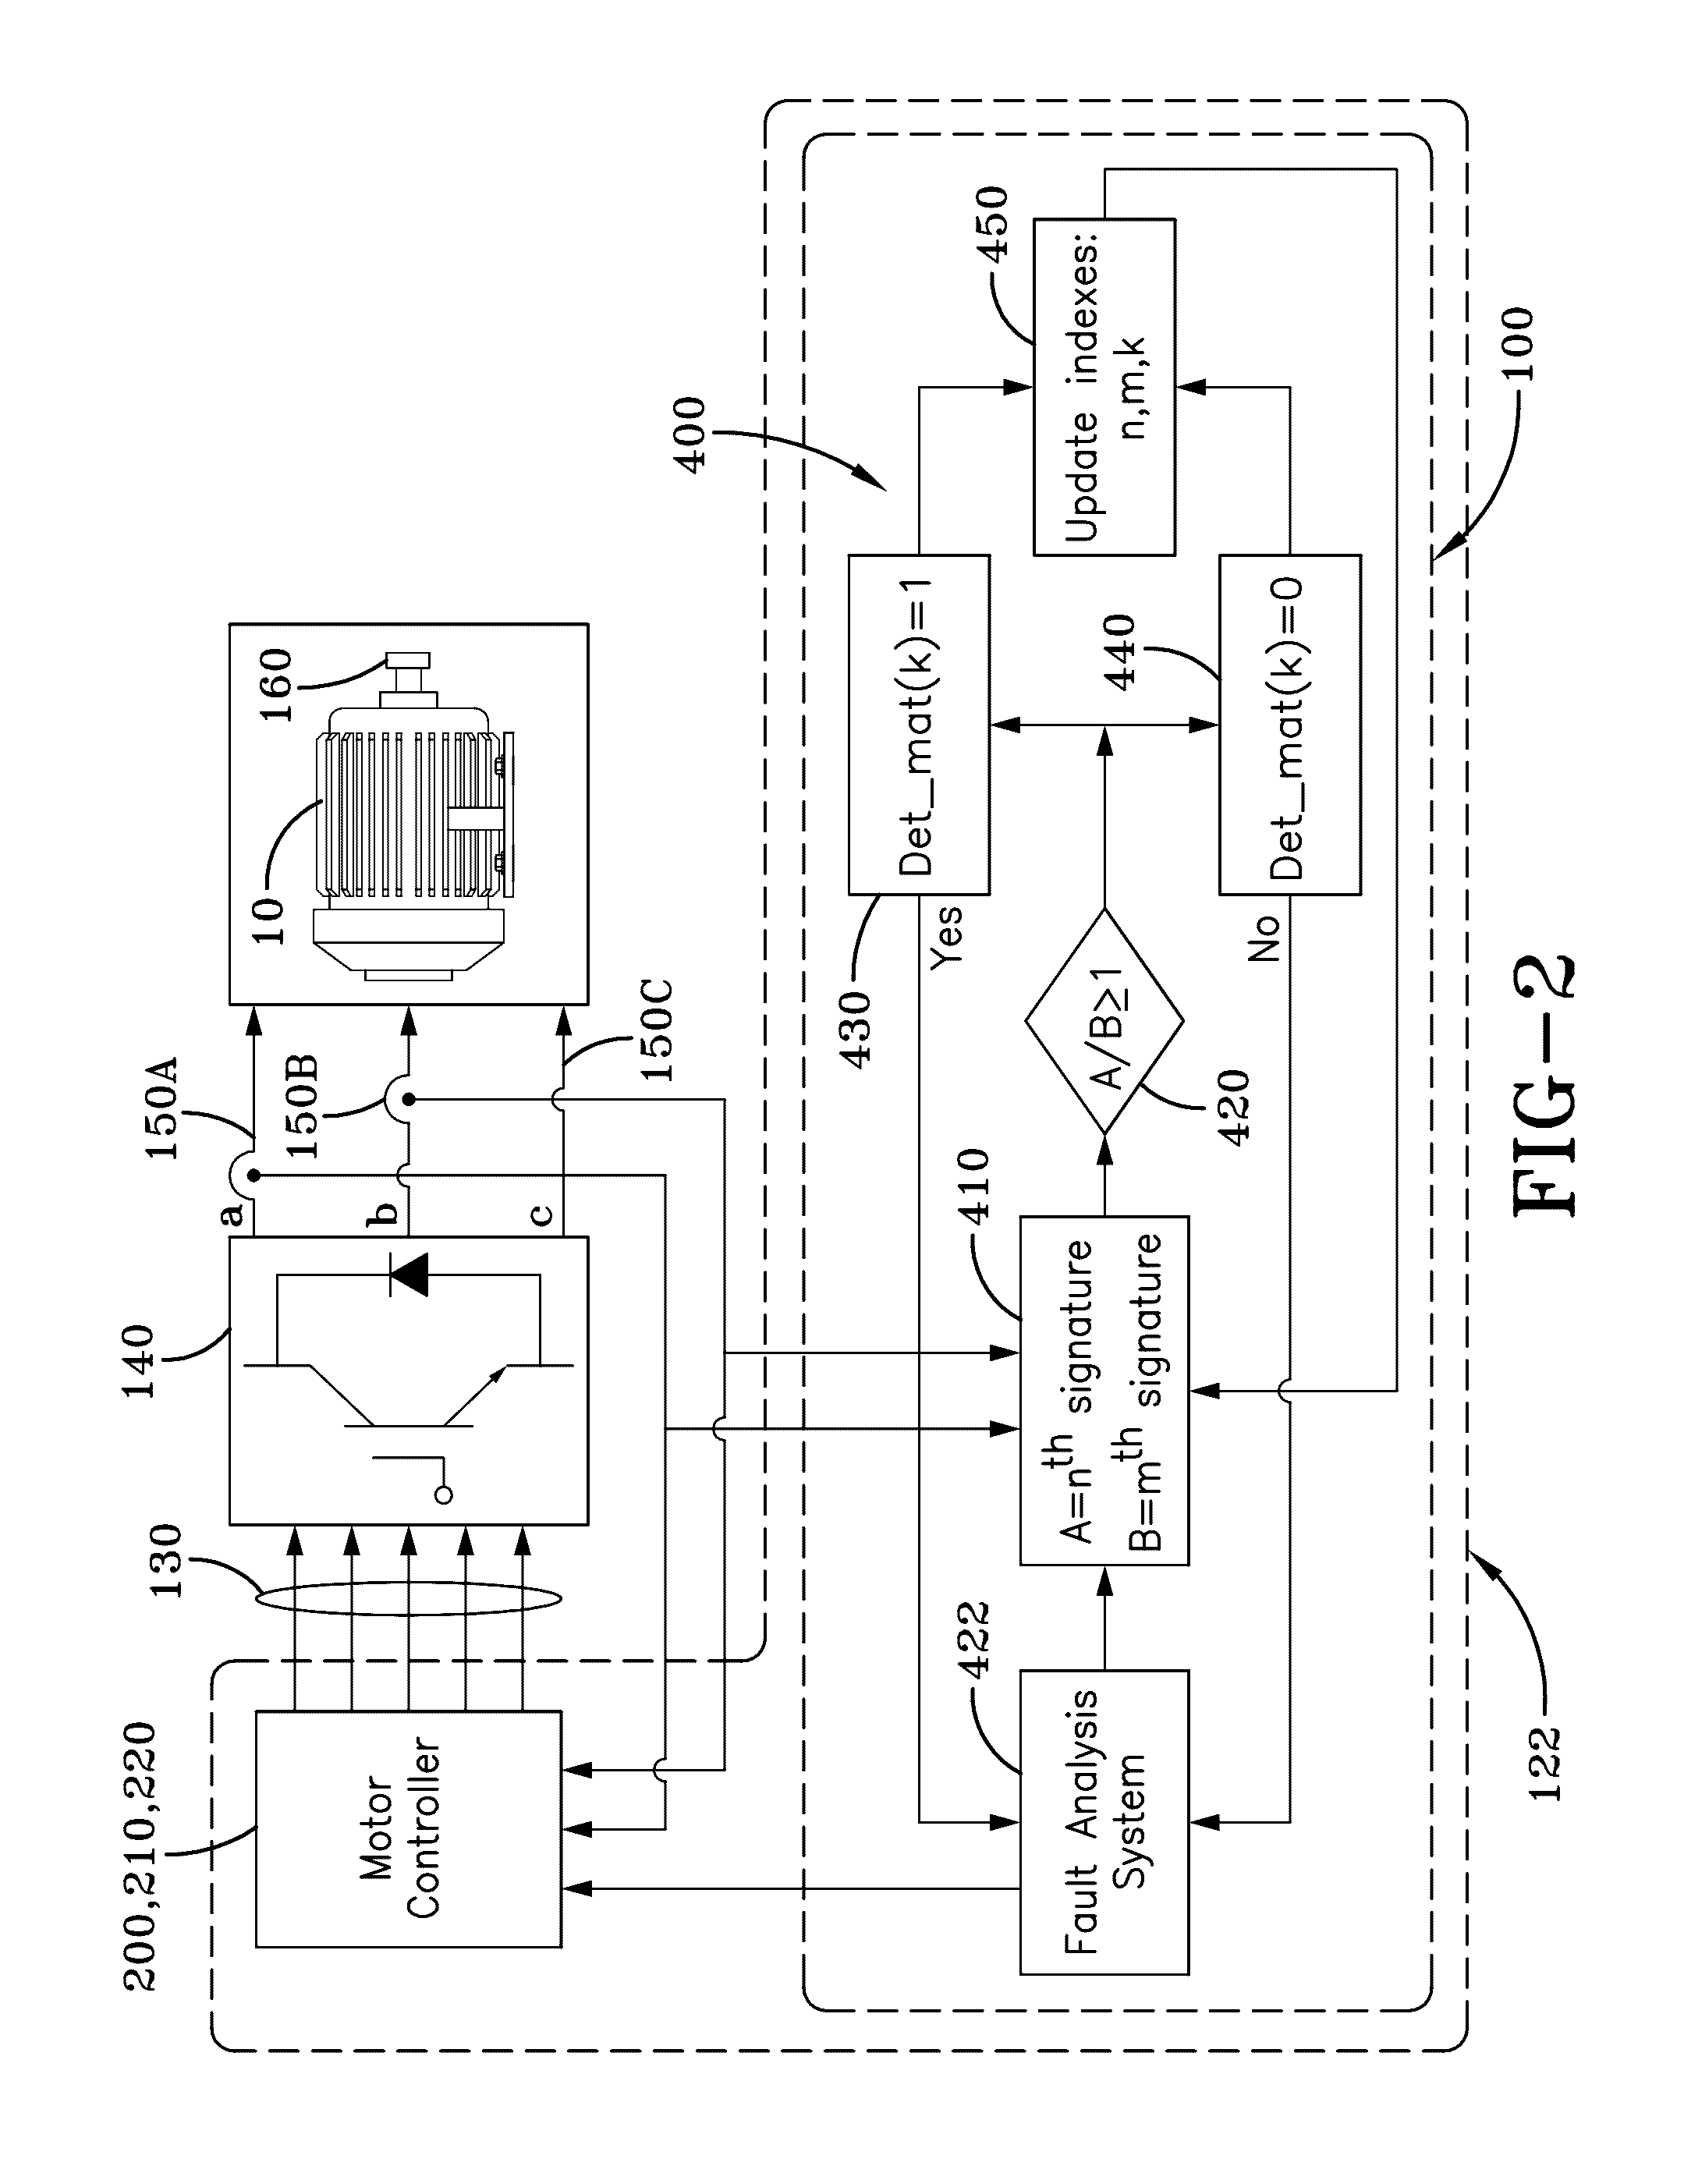 System and method for iterative condition monitoring and fault diagnosis of electric machines